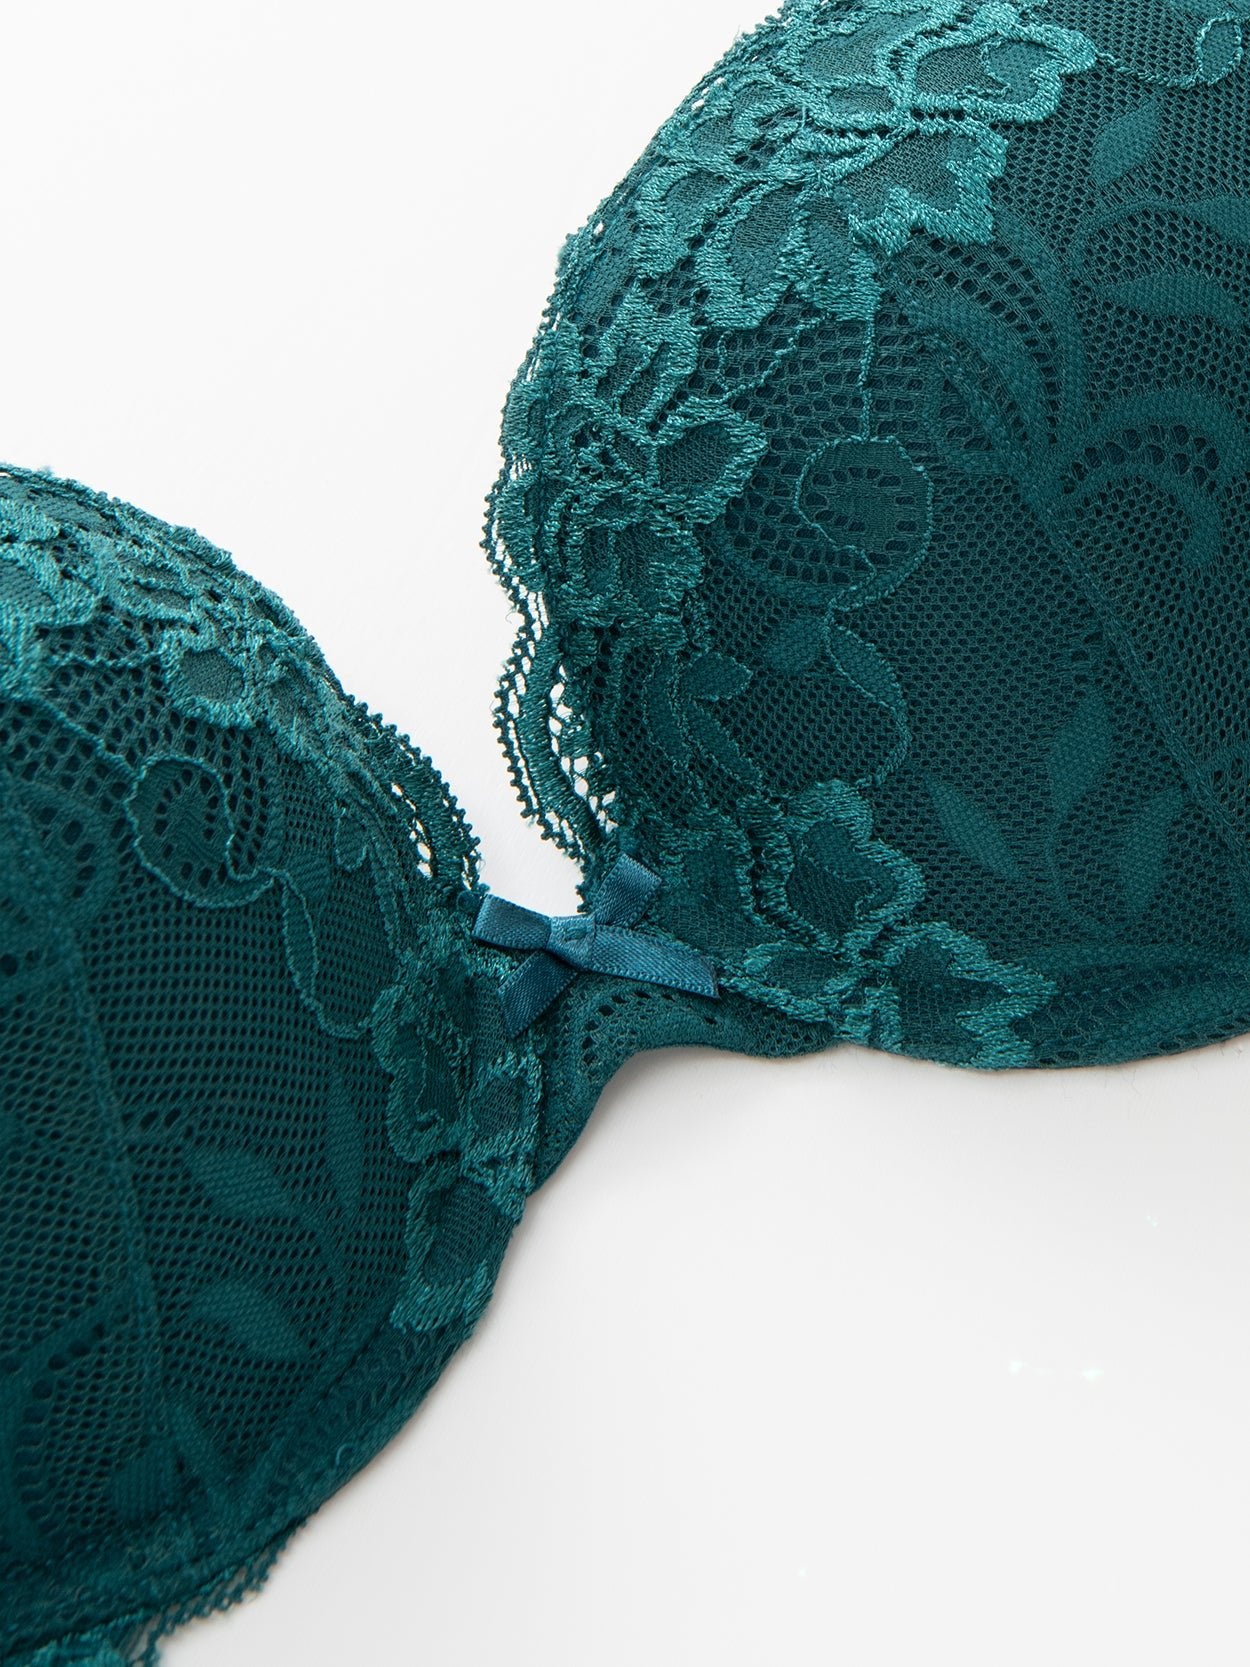 Sea green lace underwire push-up Bra- bow detail - Size 28C